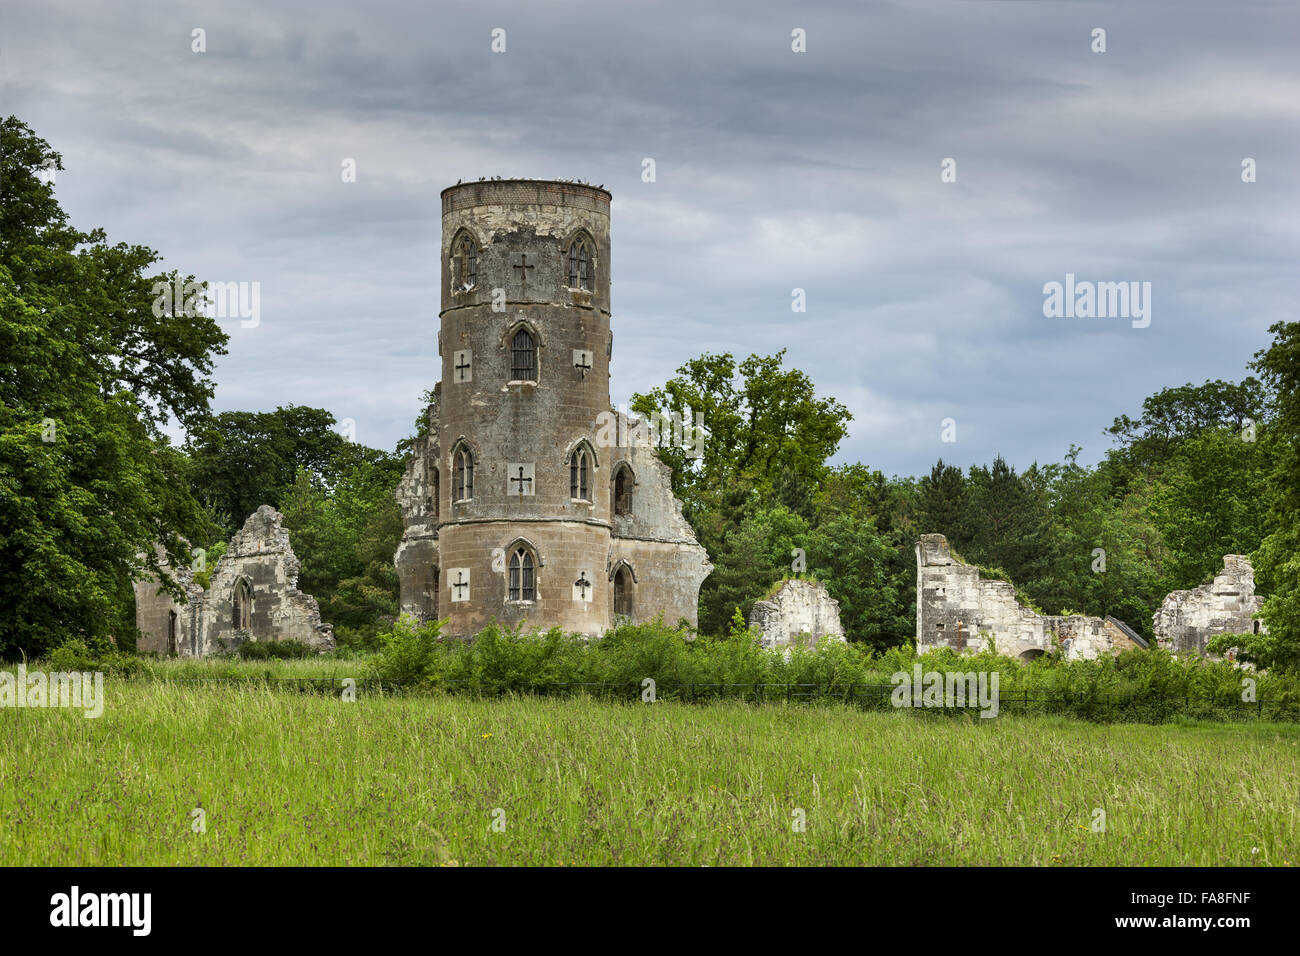 The Gothic Tower on Johnson's Hill on the Wimpole Estate, Cambridgeshire. The Tower was built in 1774 to the designs of James Essex, based on the original plans twenty five years earlier by Sanderson Miller. Stock Photo